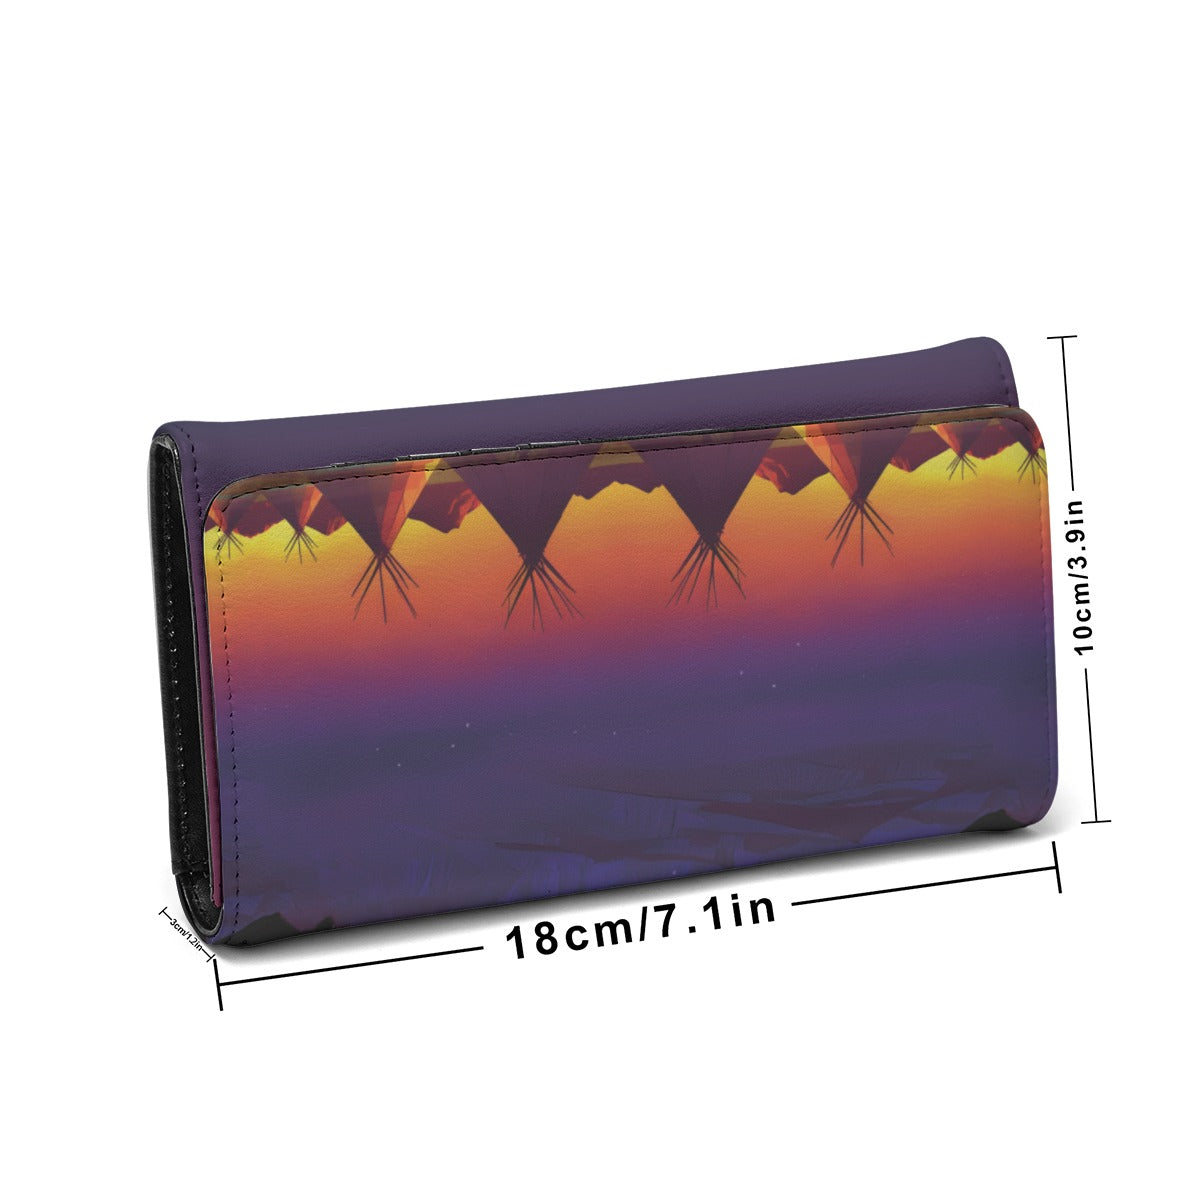 Teepees Northern Lights Foldable Wallet